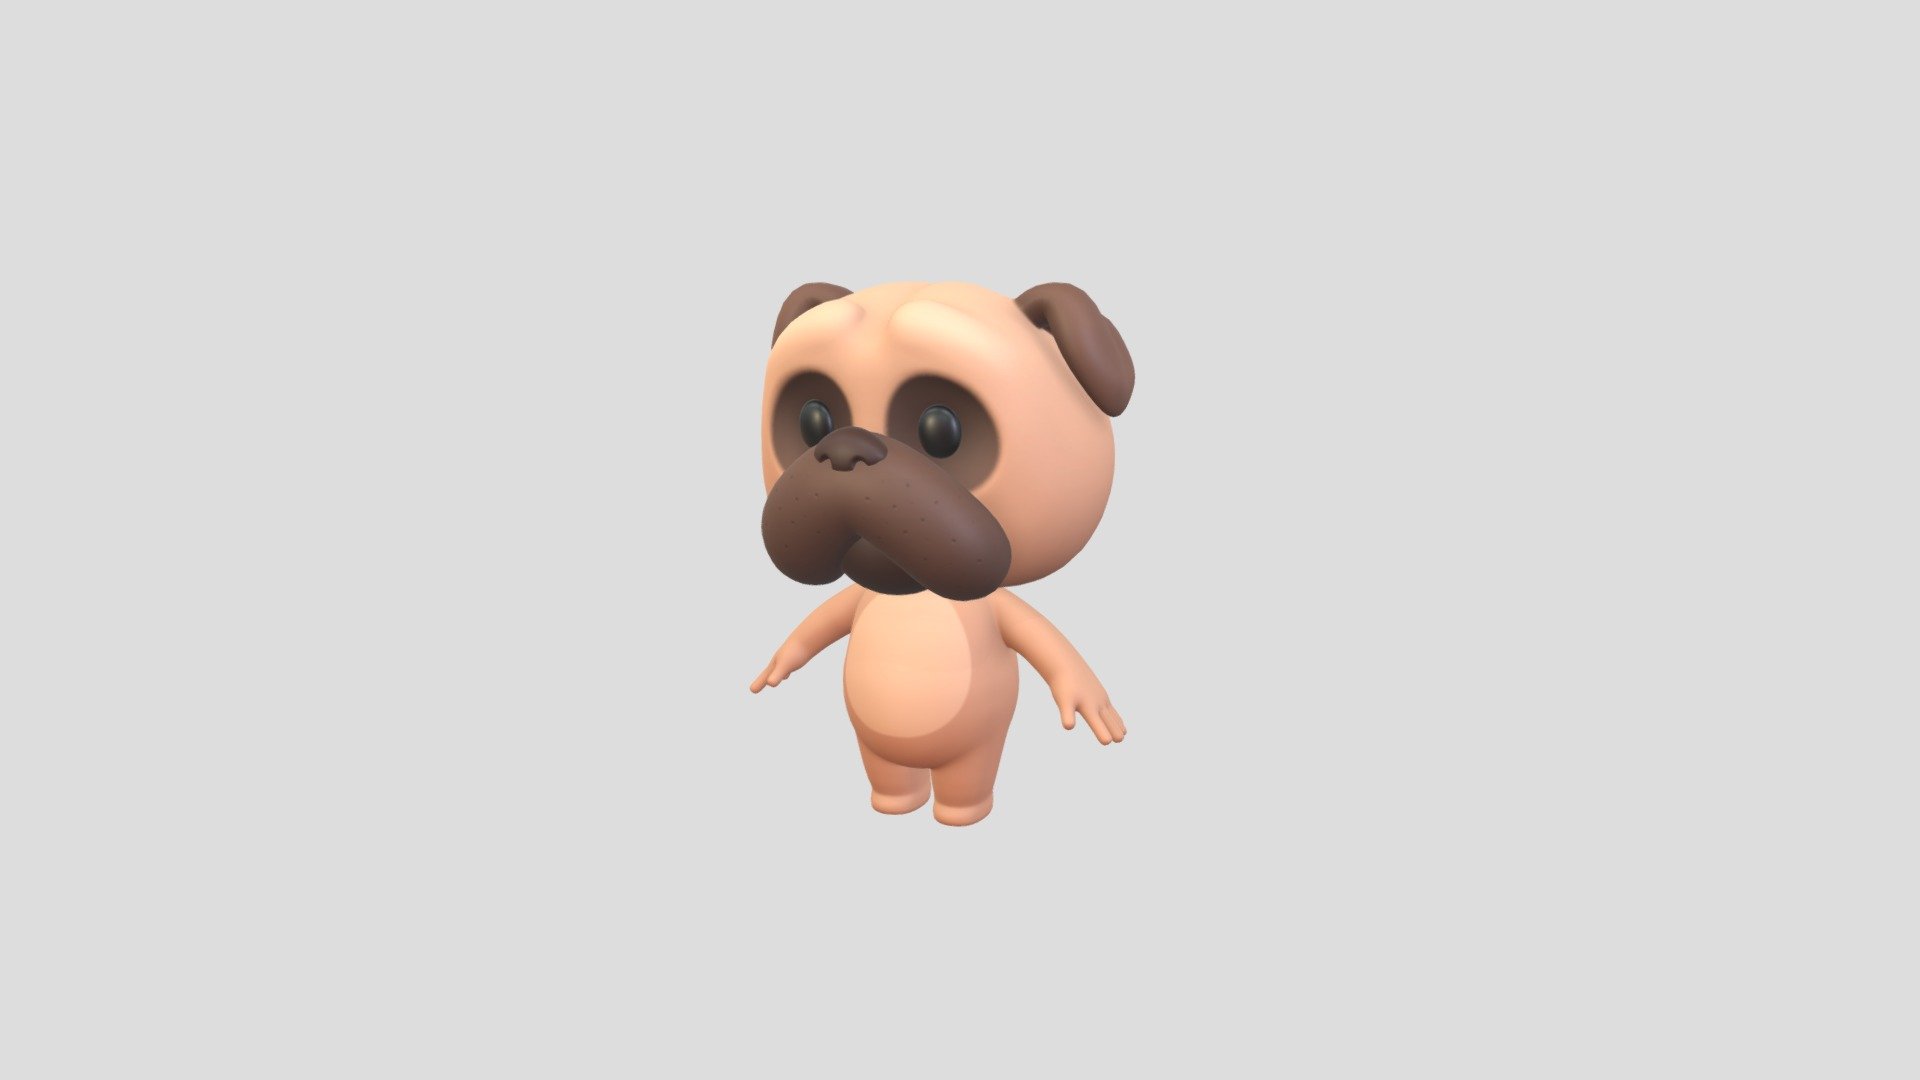 Pug Character 3d model.      
    


File Format      
 
- 3ds max 2021  
 
- FBX  
 
- OBJ  
    


Clean topology    

No Rig                          

Non-overlapping unwrapped UVs        
 


PNG texture               

2048x2048                


- Base Color                        

- Normal                            

- Roughness                         



3,786 polygons                          

3,857 vertexs                          
 - Character191 Pug - Buy Royalty Free 3D model by BaluCG 3d model